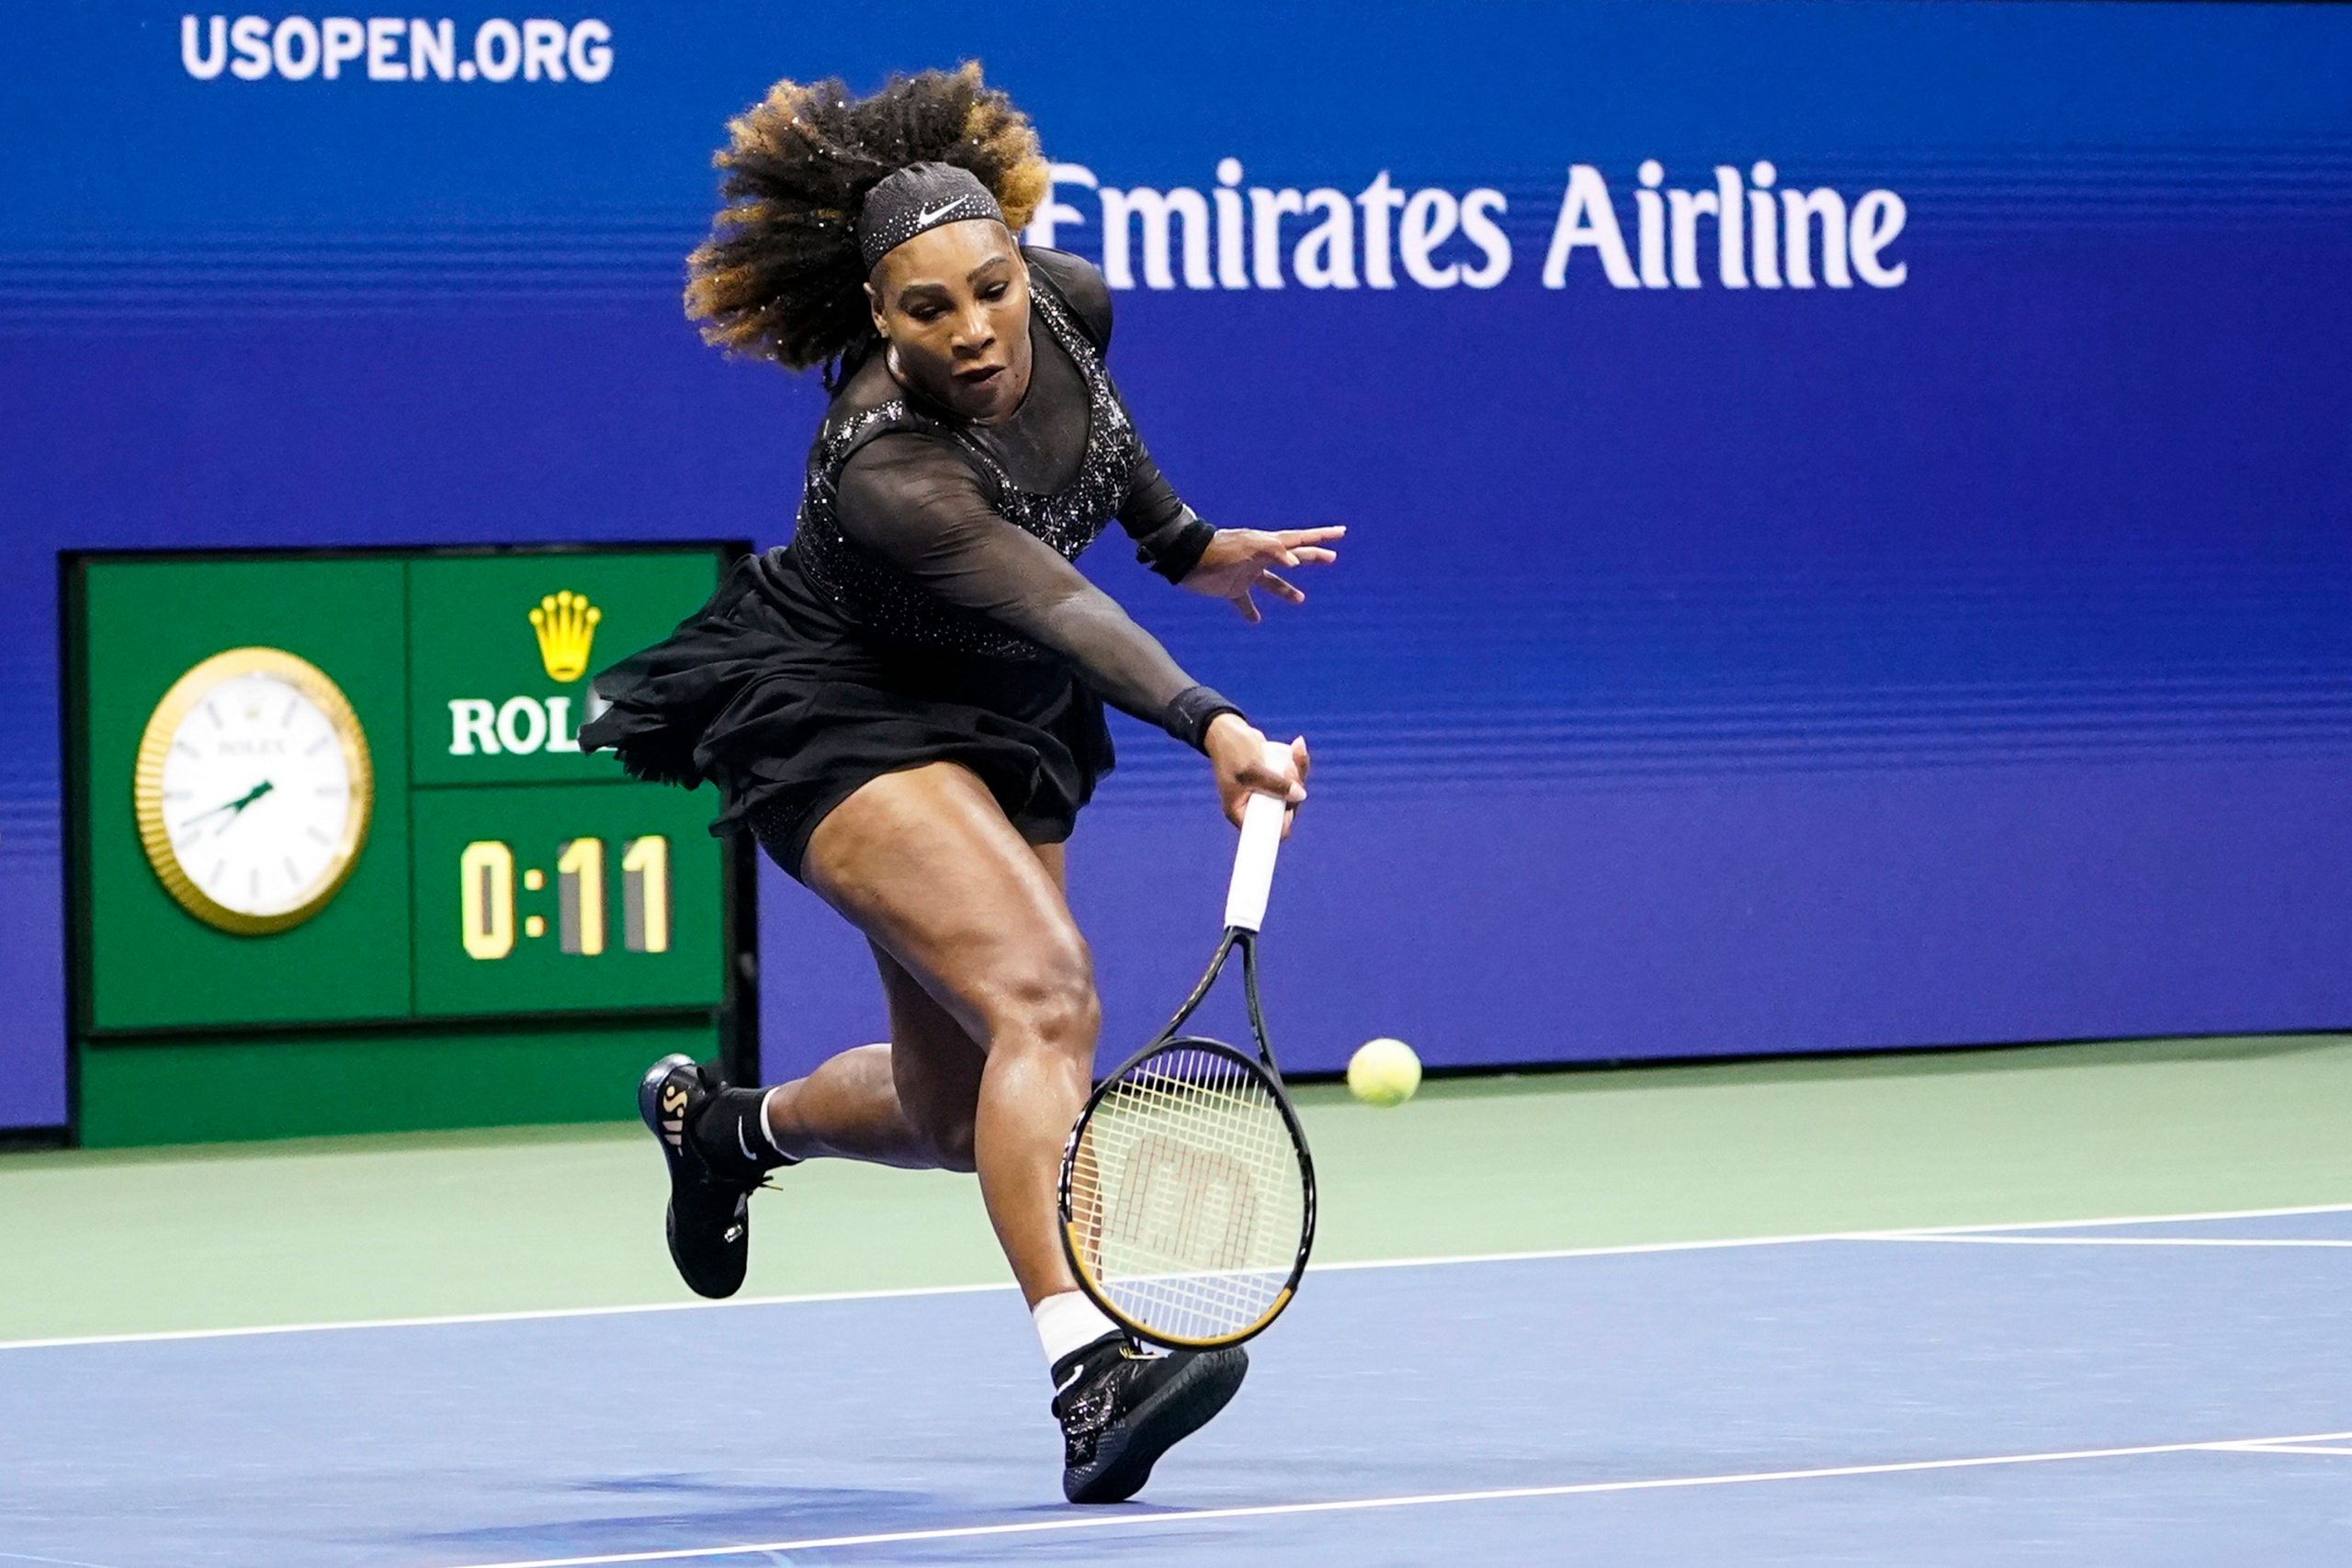 Serena Williams knocked out of US Open 2022